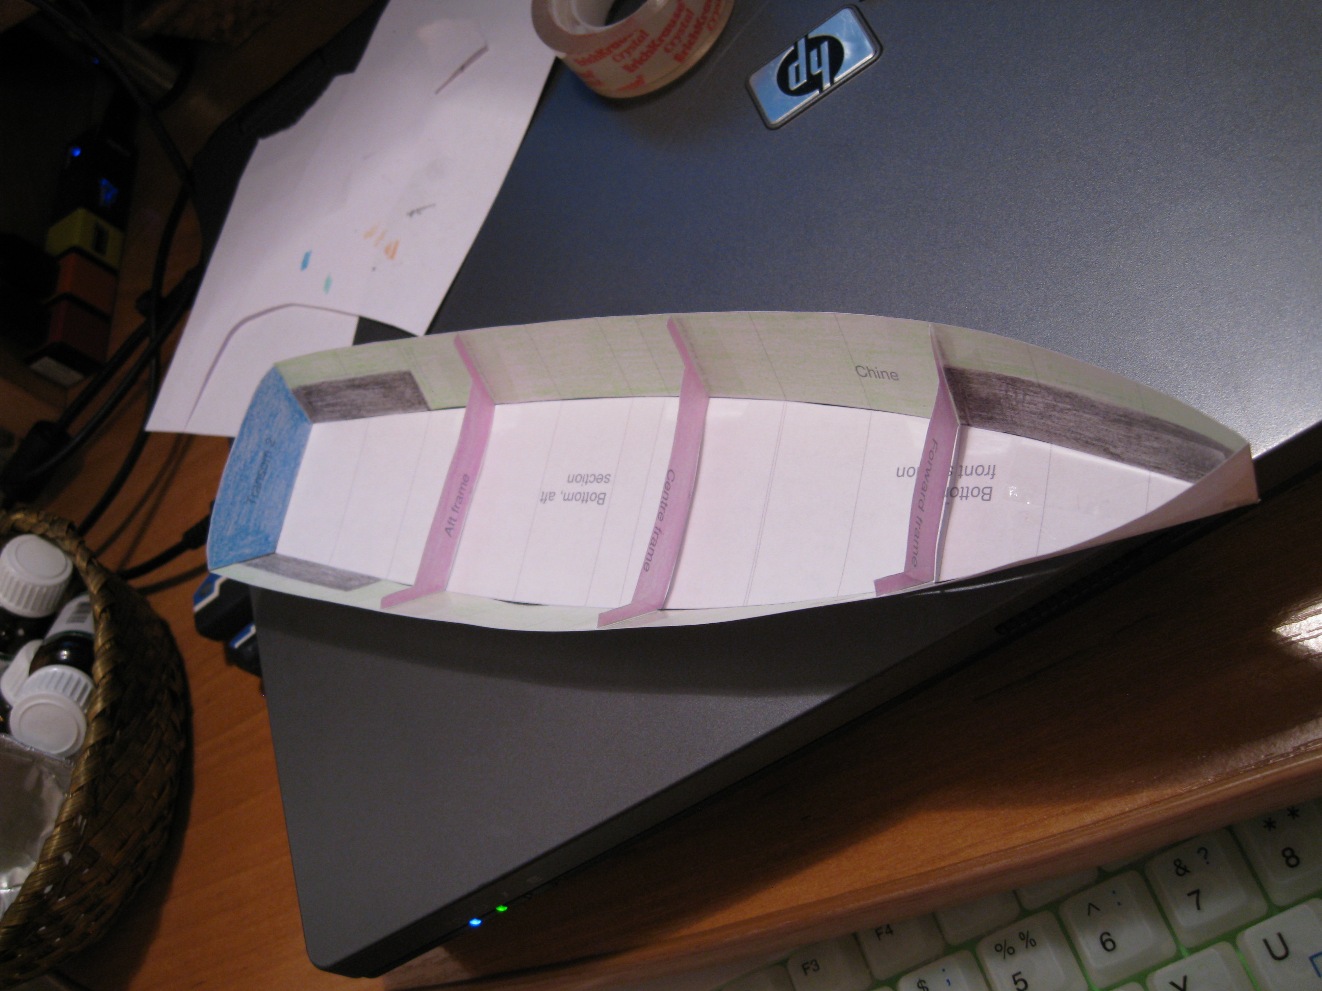 Simple Plywood Boat Plans